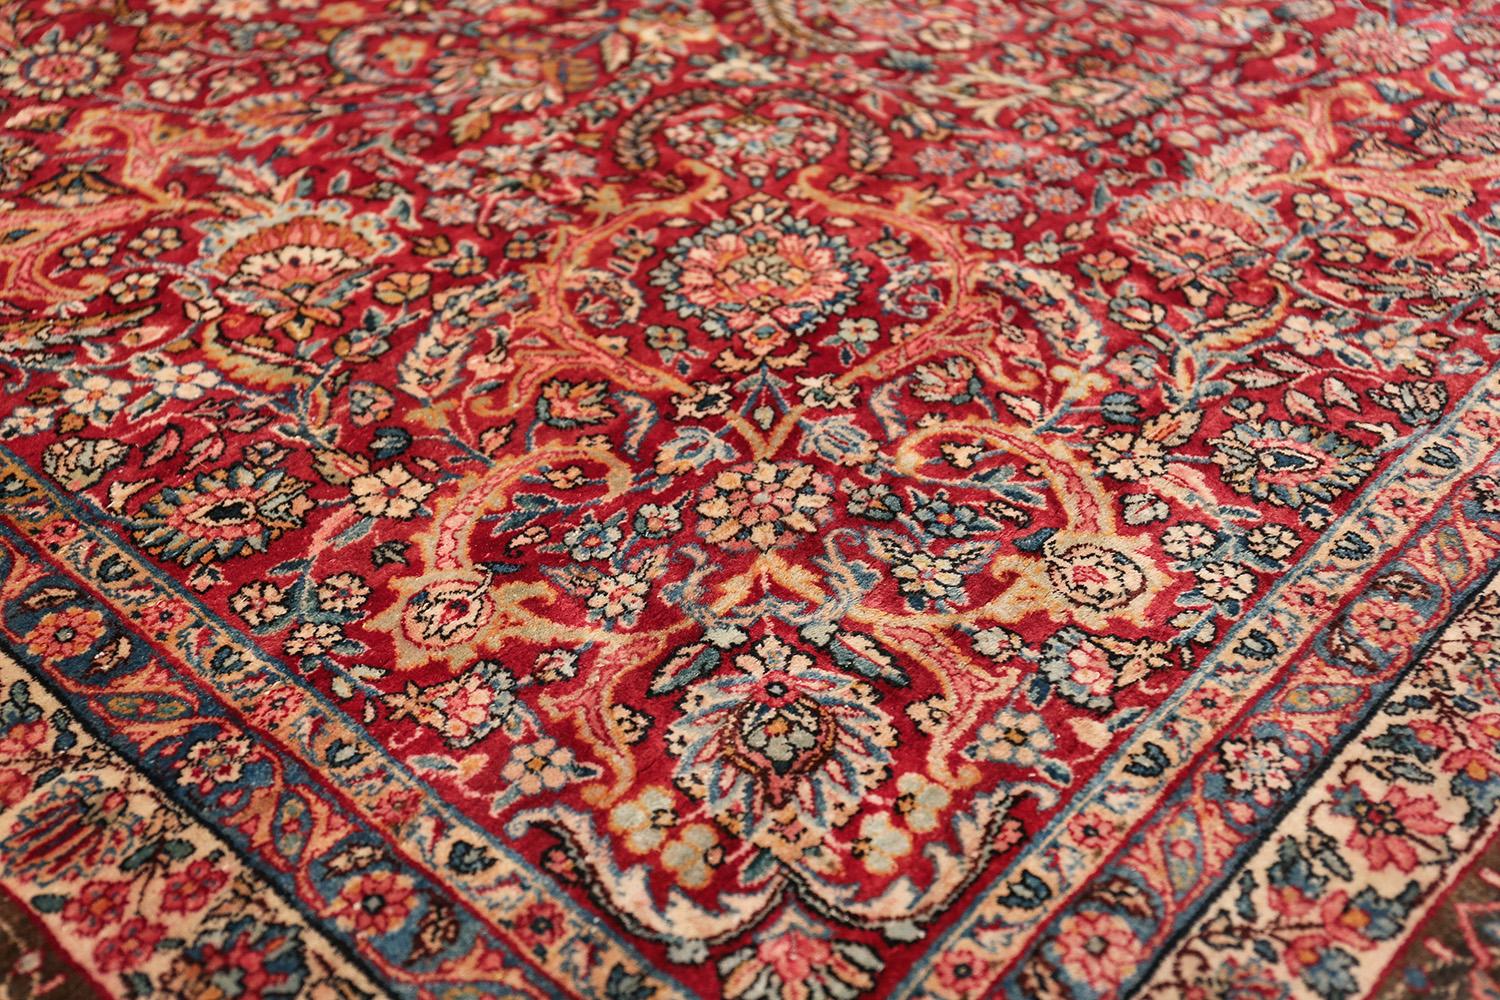 Antique Kerman Persian Rug. Size: 9 ft 9 in x 17 ft 3 in (2.97 m x 5.26 m) 2